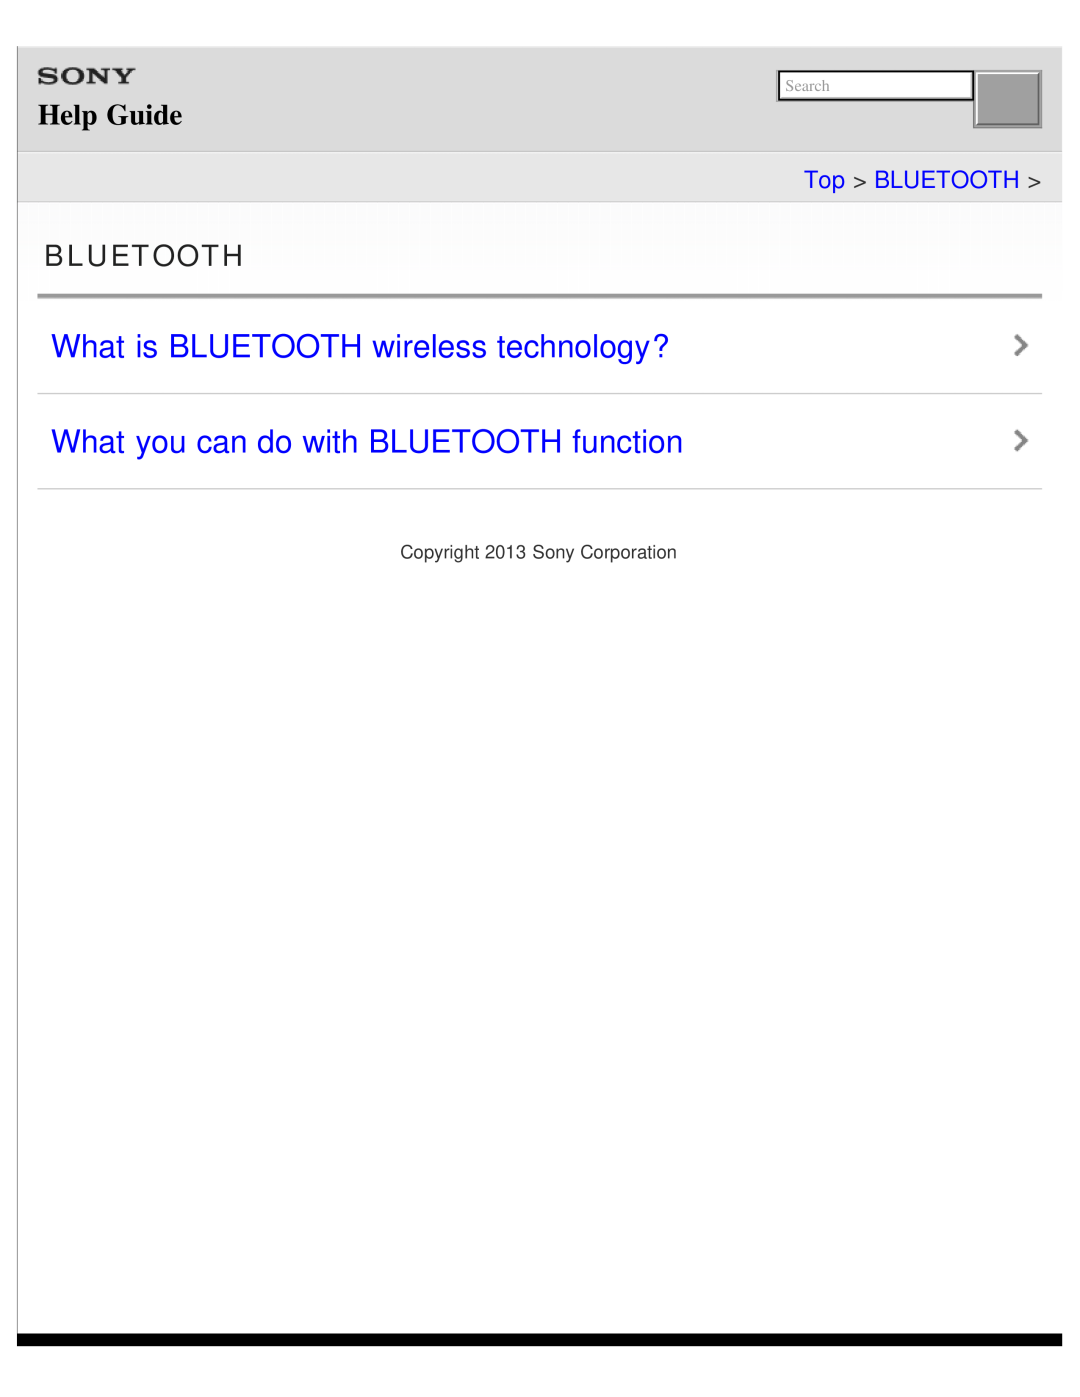 Sony DR-BTN200 What is BLUETOOTH wireless technology?, What you can do with BLUETOOTH function, Help Guide, Bluetooth 